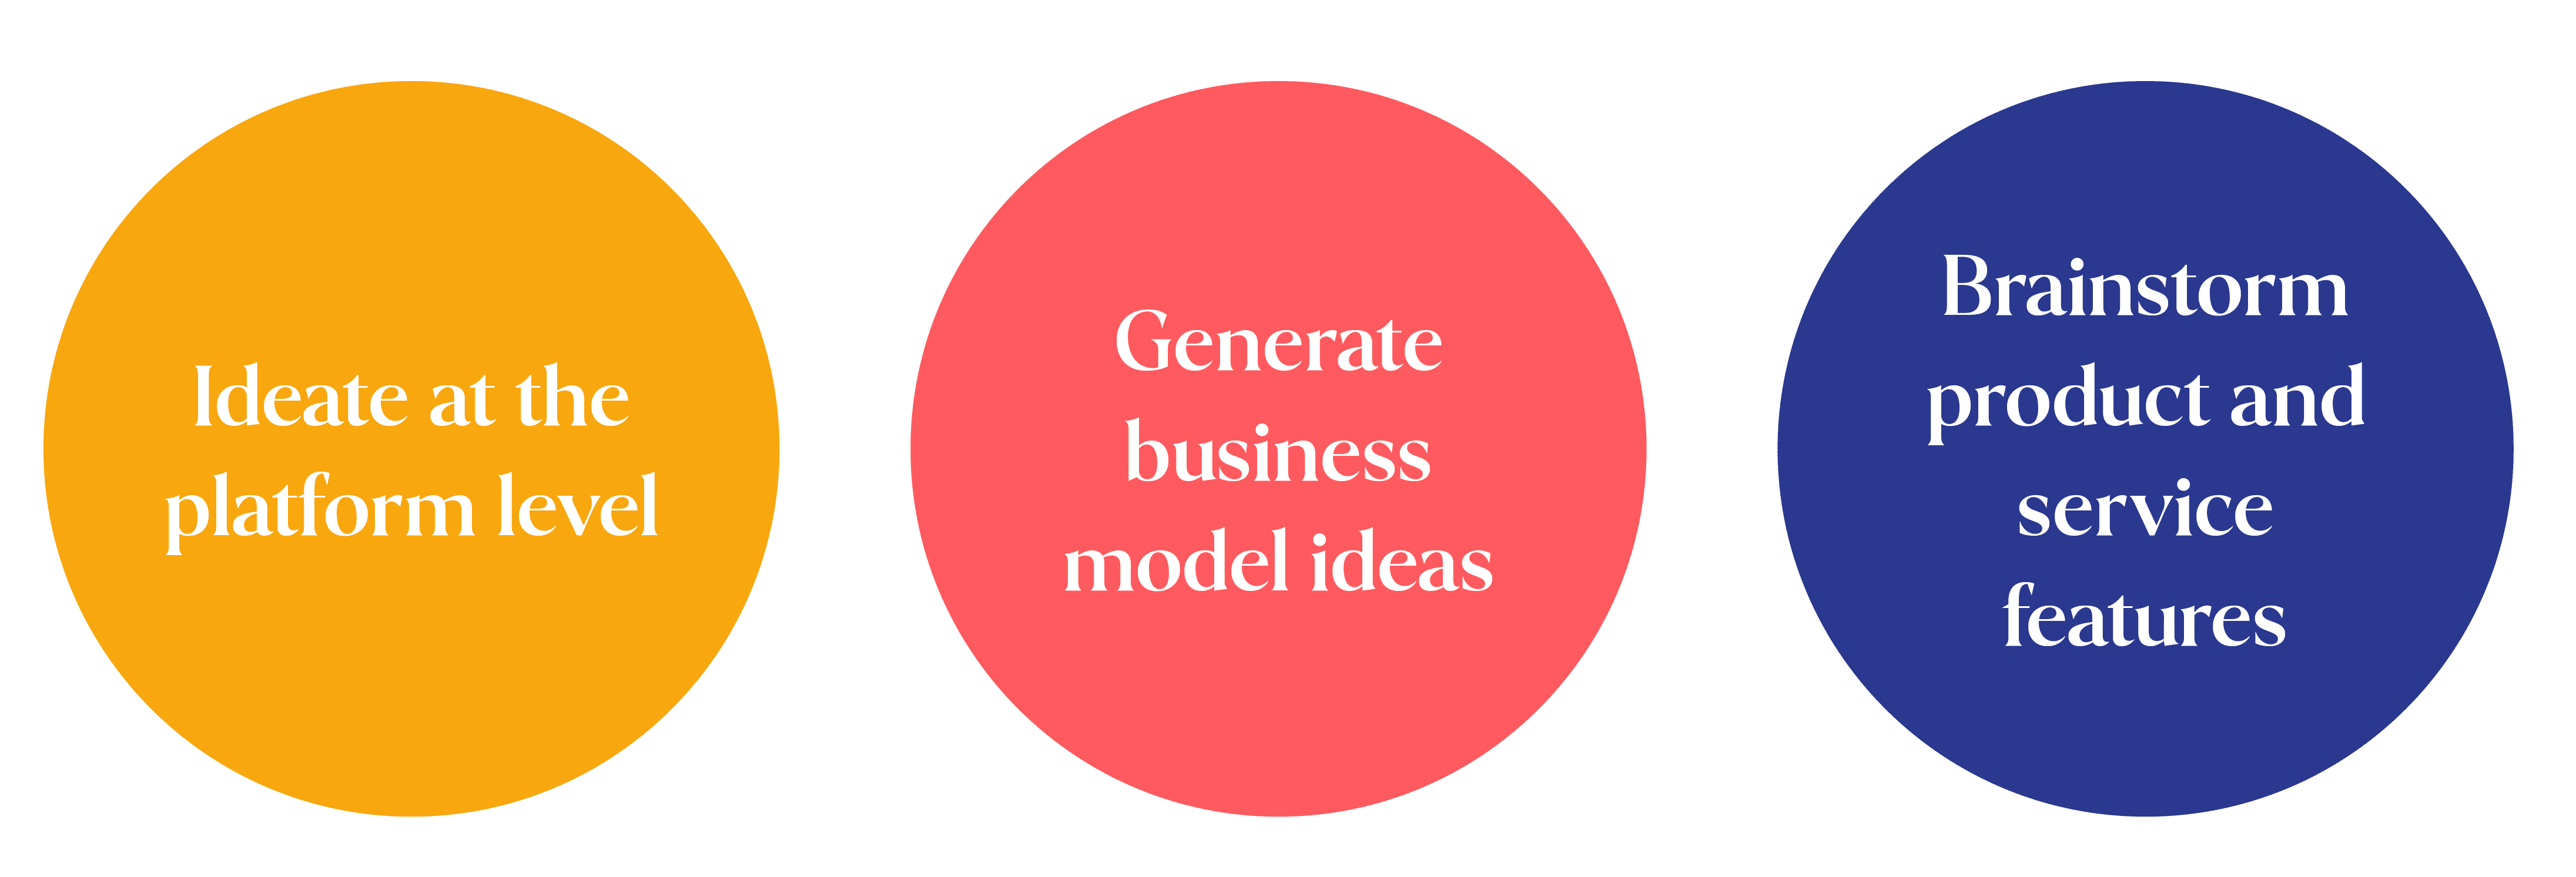 Ideate at the platform level, generate business model ideas, and brainstorm product and service features graphic